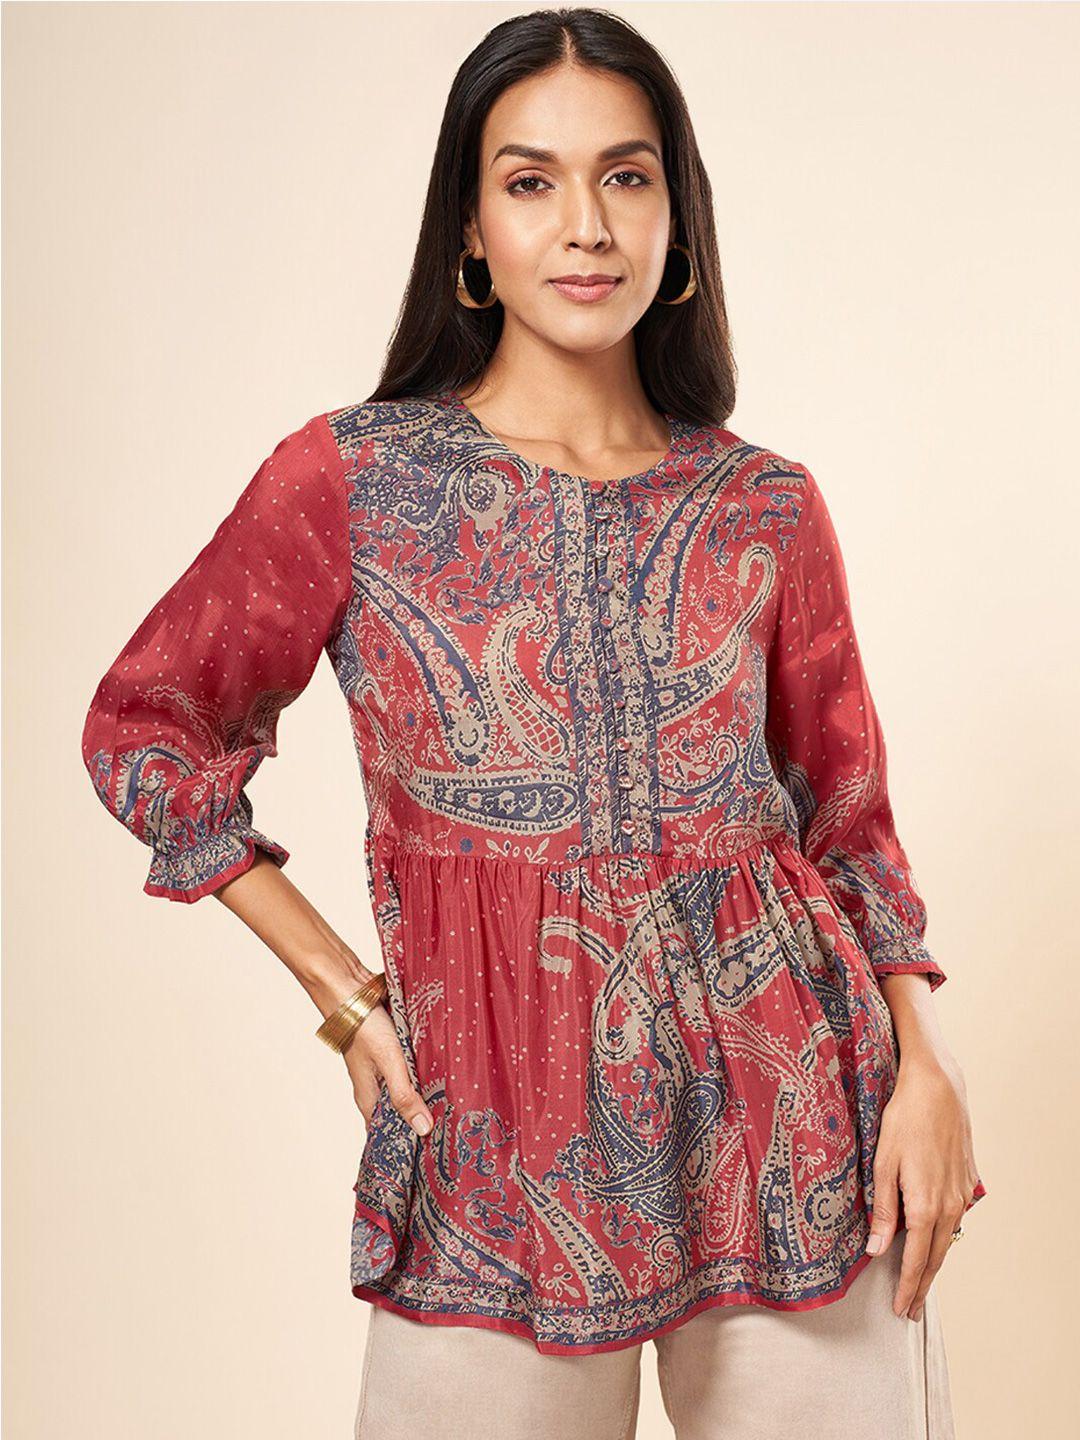 marigold lane paisley ethnic motifs printed cuffed sleeves a-line top